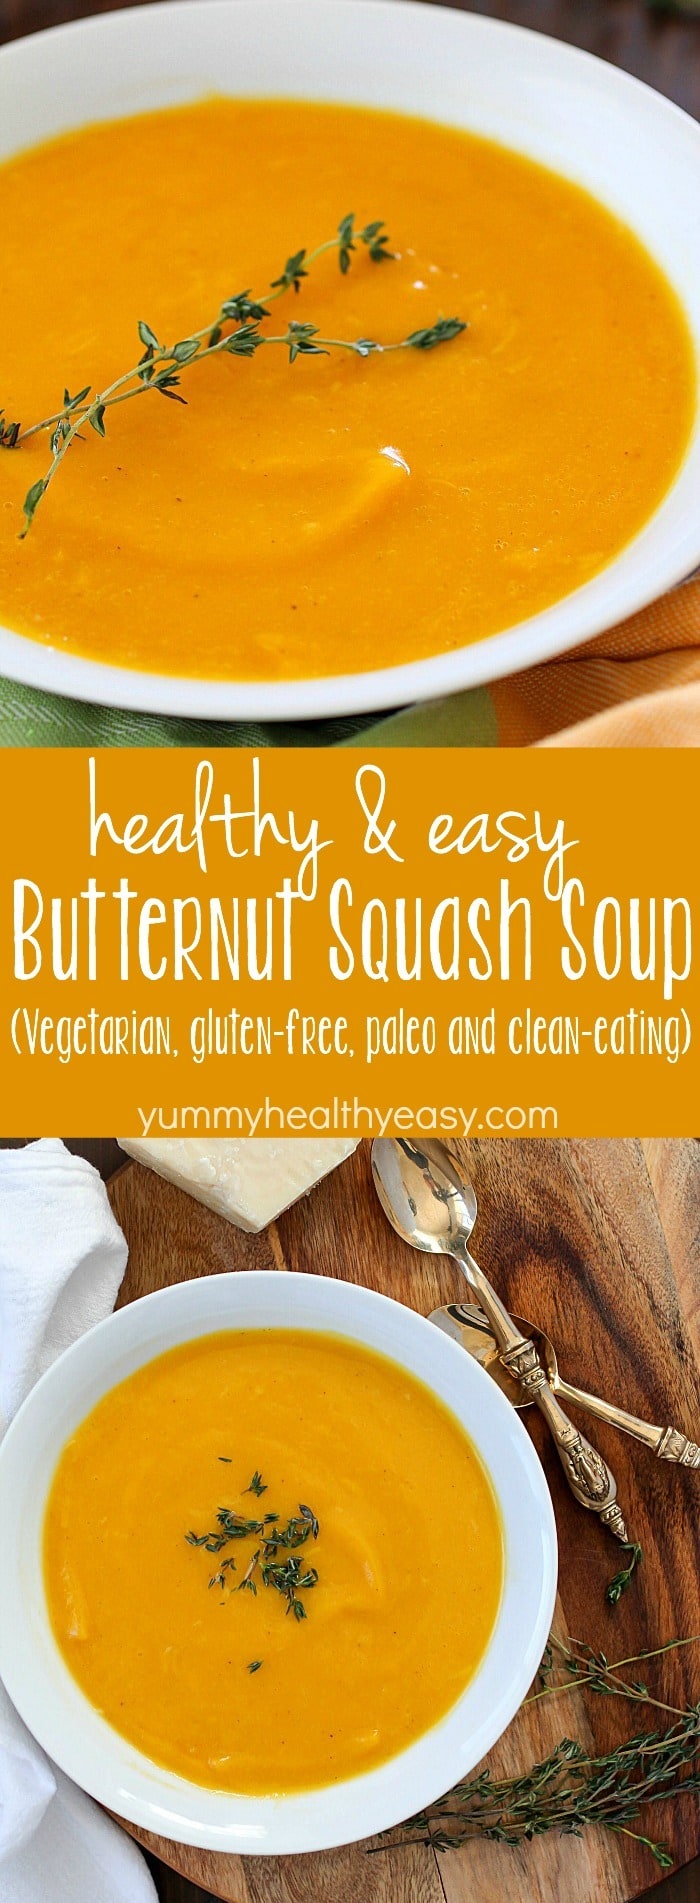 This is the BEST ever EASY Butternut Squash Soup! Only a few ingredients to make this incredible soup. This is one of our favorite soups to make on a cold day! (Vegetarian, gluten-free, paleo and clean eating)